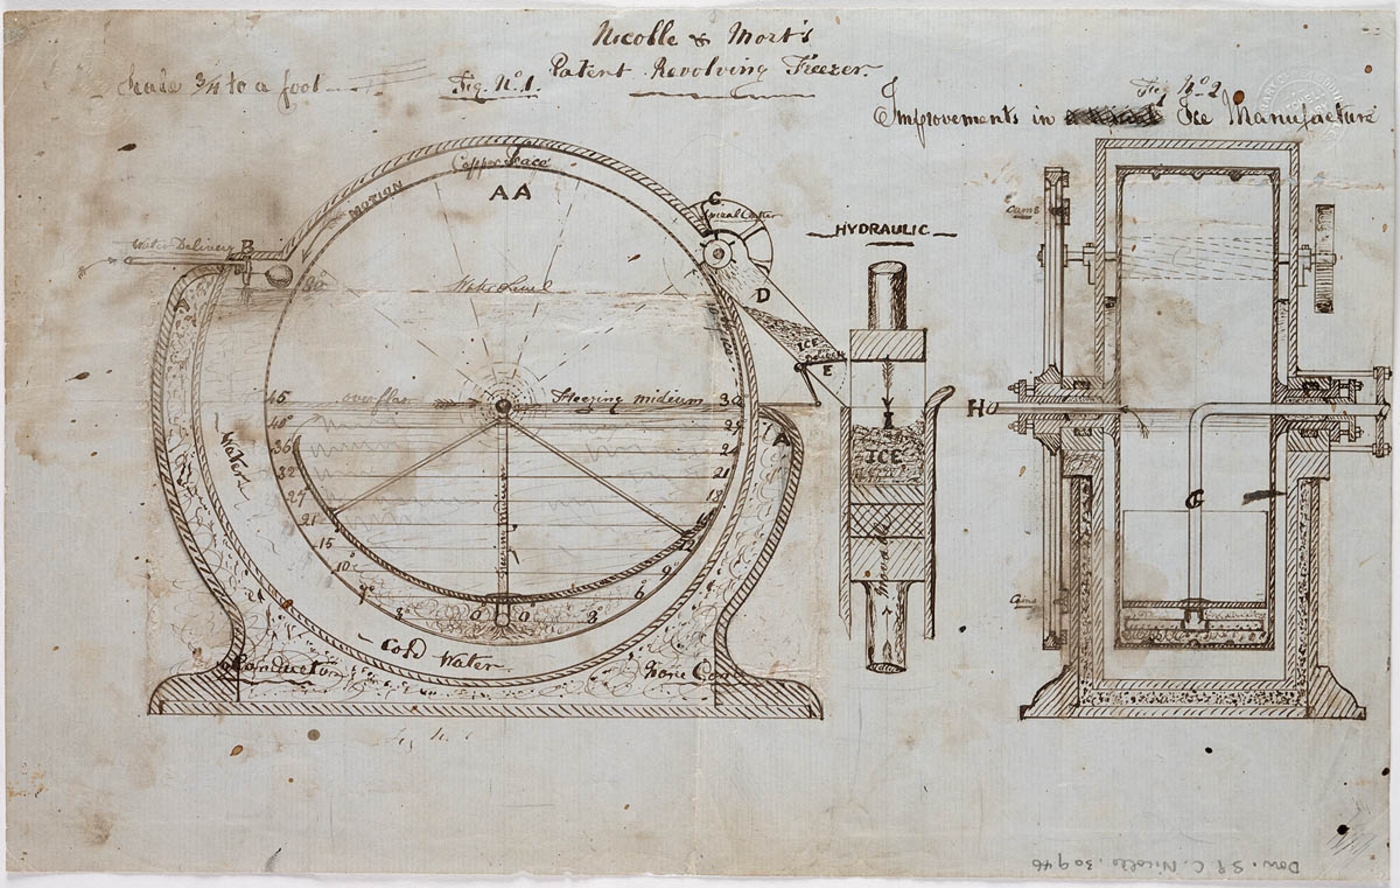 Design for an ice making machine, which worked on a chemical reaction to produce the freezing temperatures required.